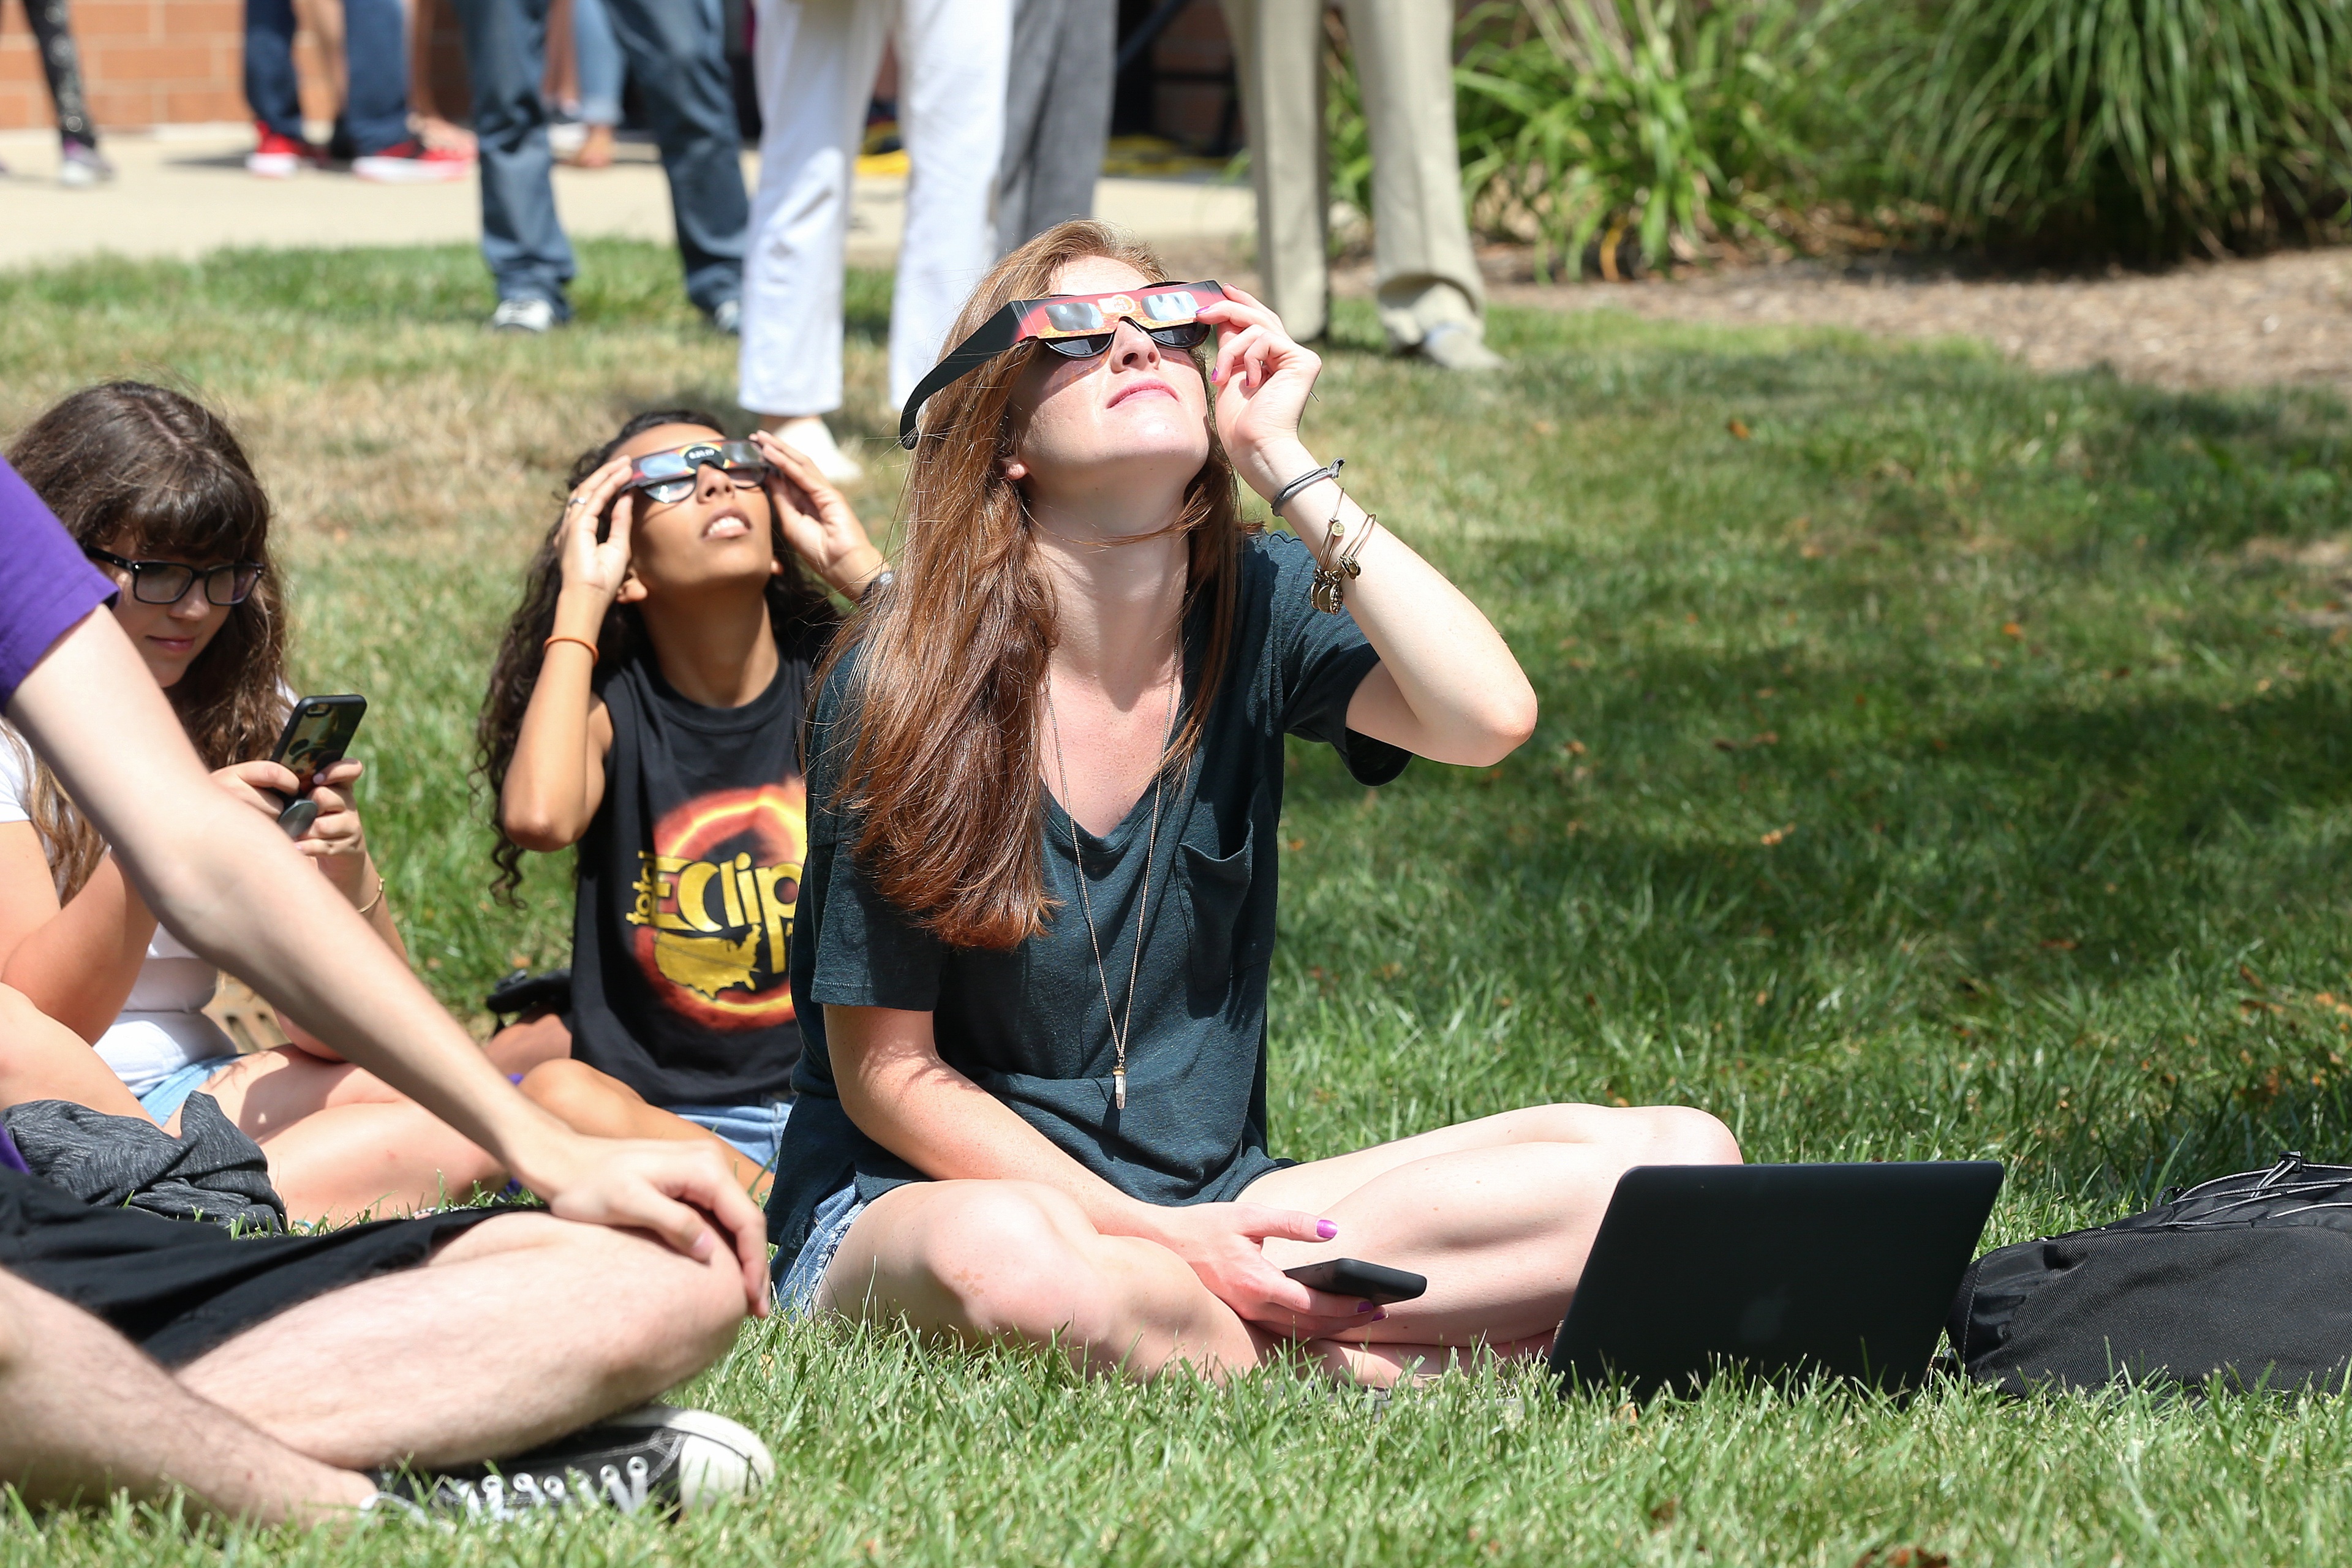 Students in grass with eclipse glasses on